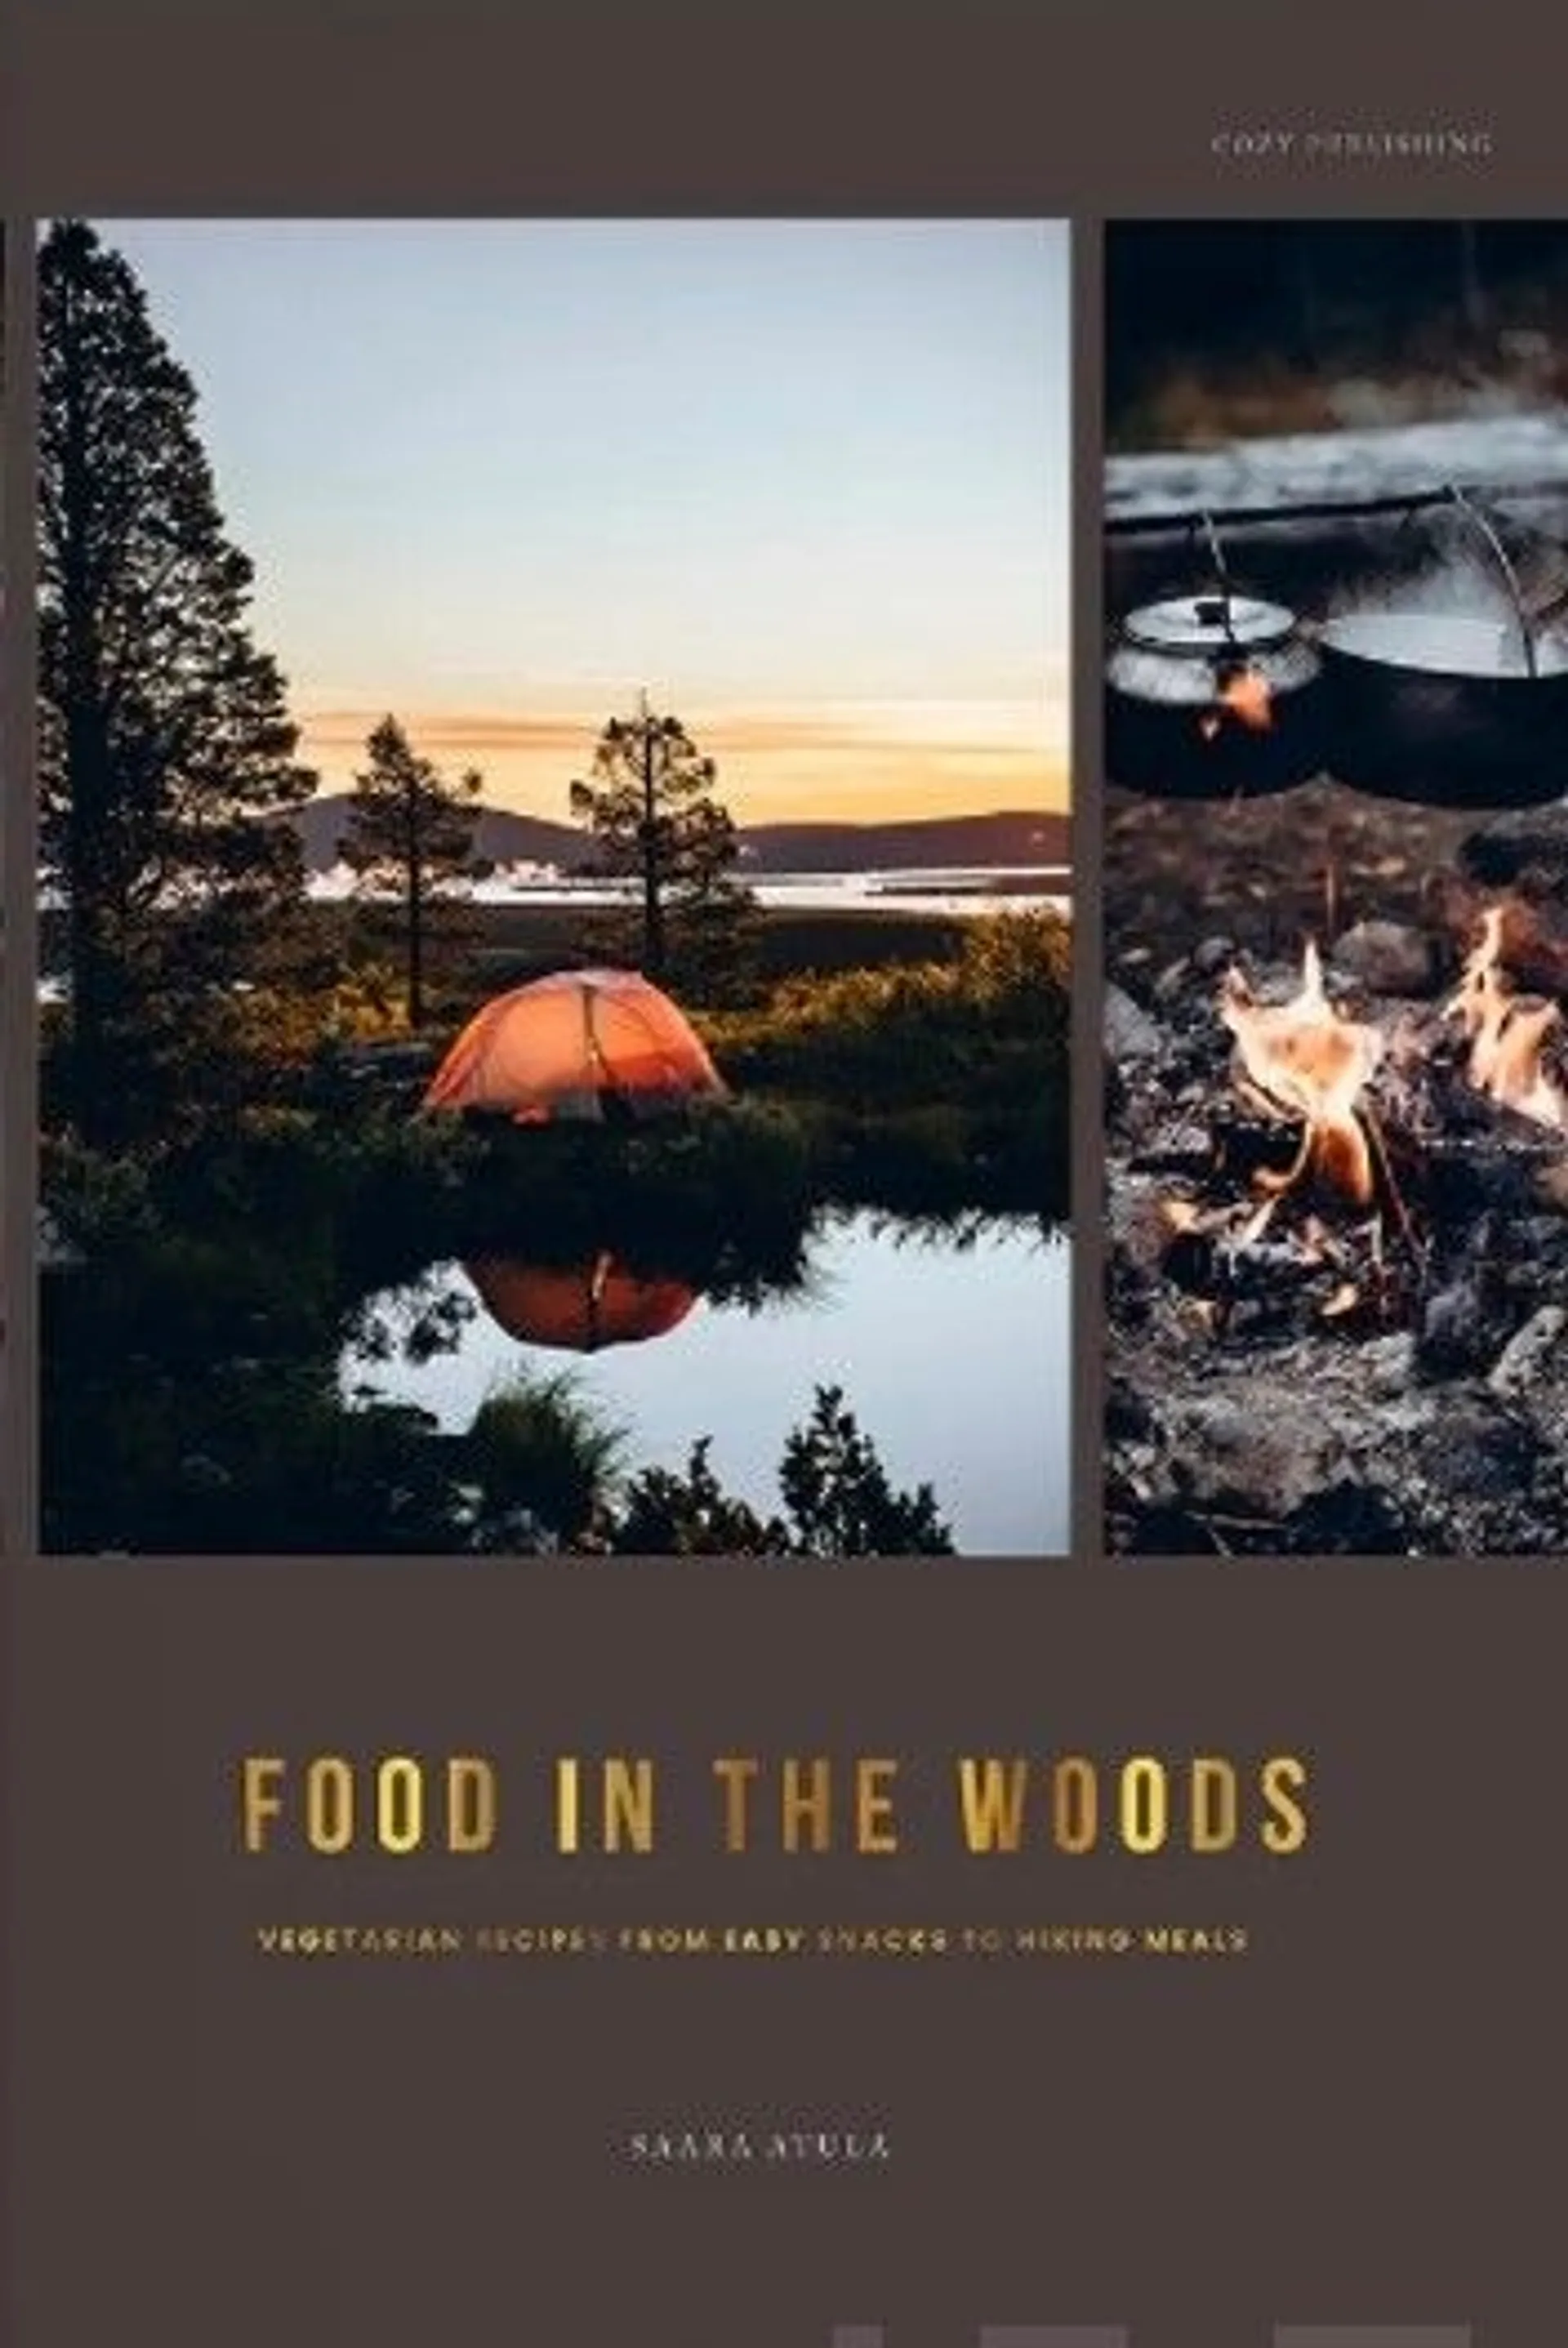 Atula, Food in the Woods - Vegetarian Recipes from Easy Snacks to Hiking Meals